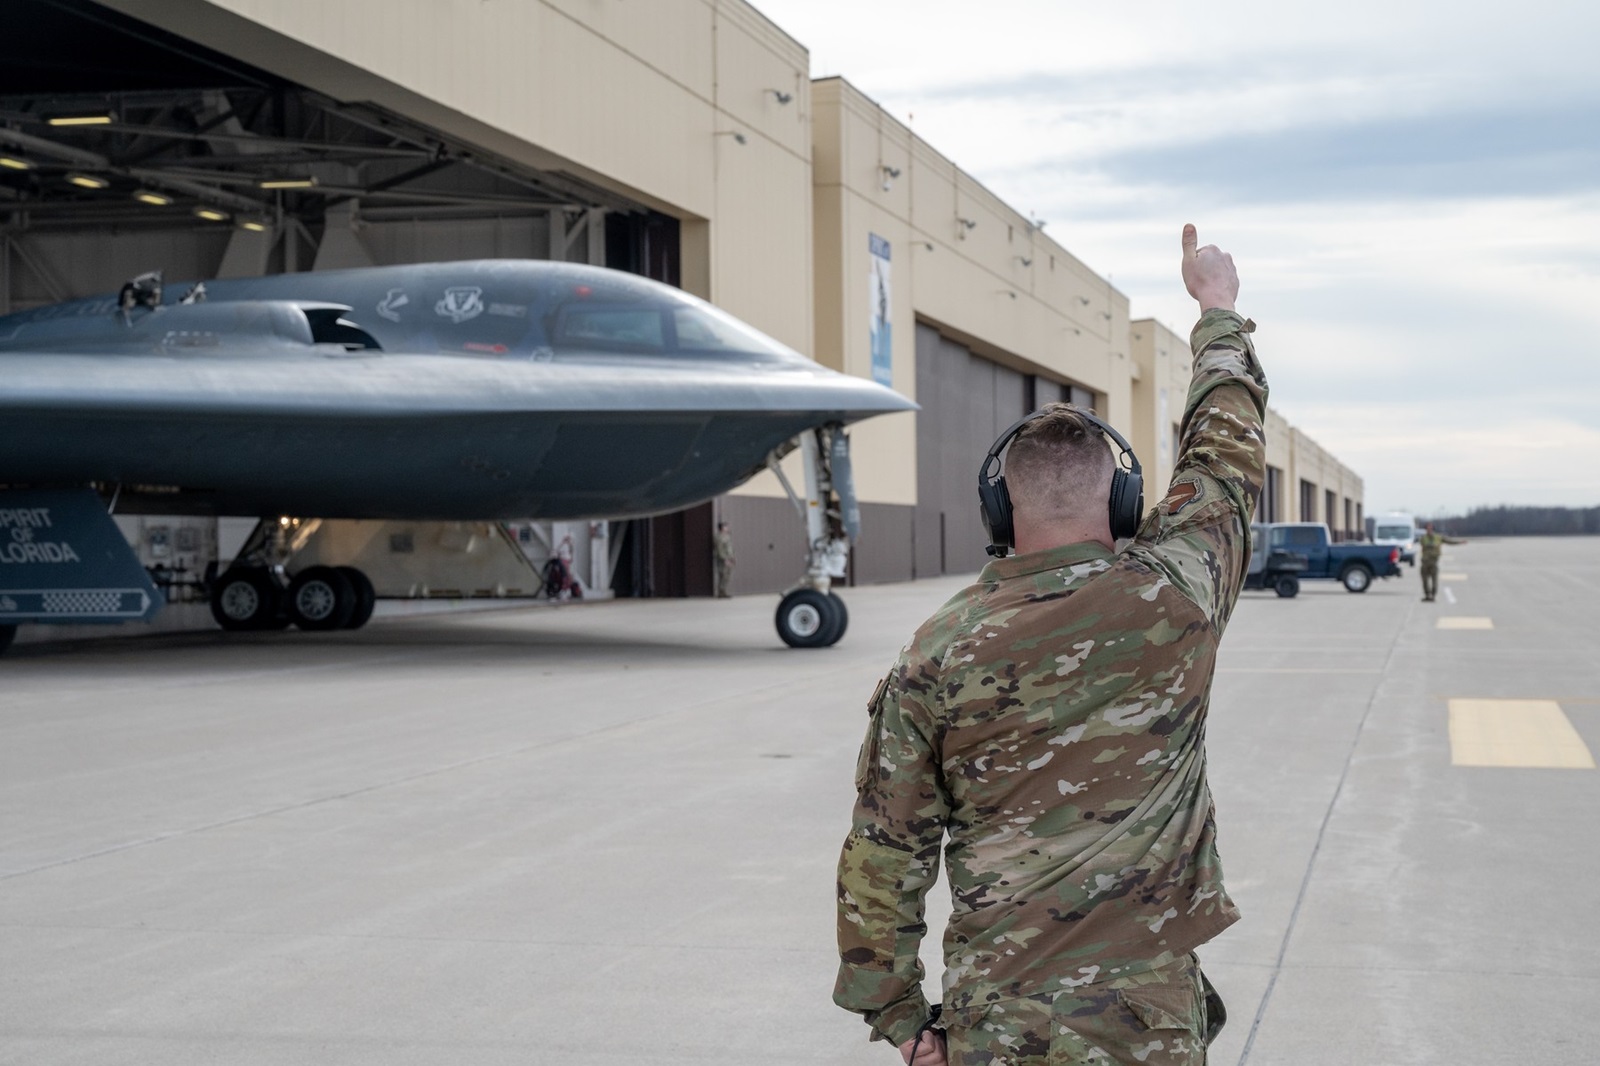 February 1, 2024, Knob Noster, Mo, United States: U.S. Air Force Tech. Sgt. Travis Dowler, 131st Aircraft Maintenance Squadron crew chief, marshals a U.S. Air Force B -2 Spirit Stealth Bomber as it rolls out of the hangar on the flight line at Whiteman Air Force Base, February 1, 2024 in  Knob Noster, Missouri, USA.,Image: 849607176, License: Rights-managed, Restrictions: ***
HANDOUT image or SOCIAL MEDIA IMAGE or FILMSTILL for EDITORIAL USE ONLY! * Please note: Fees charged by Profimedia are for the Profimedia's services only, and do not, nor are they intended to, convey to the user any ownership of Copyright or License in the material. Profimedia does not claim any ownership including but not limited to Copyright or License in the attached material. By publishing this material you (the user) expressly agree to indemnify and to hold Profimedia and its directors, shareholders and employees harmless from any loss, claims, damages, demands, expenses (including legal fees), or any causes of action or allegation against Profimedia arising out of or connected in any way with publication of the material. Profimedia does not claim any copyright or license in the attached materials. Any downloading fees charged by Profimedia are for Profimedia's services only. * Handling Fee Only 
***, Model Release: no, Credit line: Msgt. John Hillier/U.S. Air / Zuma Press / Profimedia